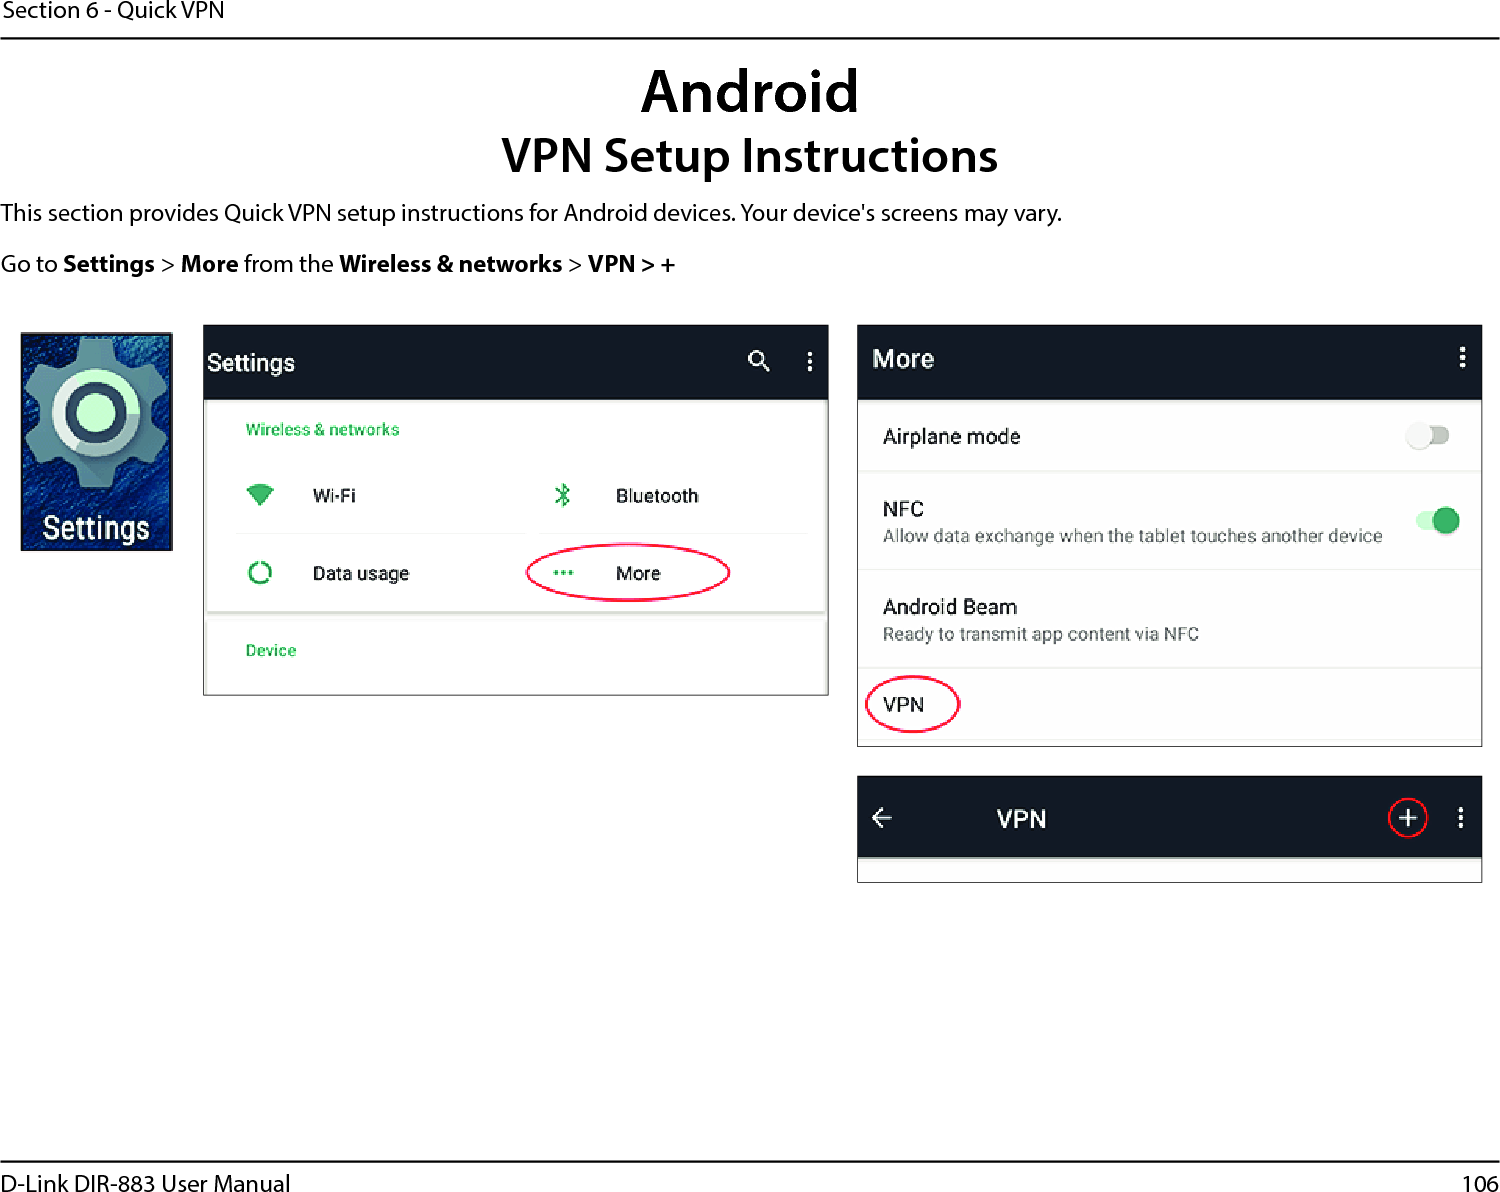 106D-Link DIR-883 User ManualSection 6 - Quick VPNThis section provides Quick VPN setup instructions for Android devices. Your device&apos;s screens may vary.Go to Settings &gt; More from the Wireless &amp; networks &gt; VPN &gt; +AndroidVPN Setup Instructions